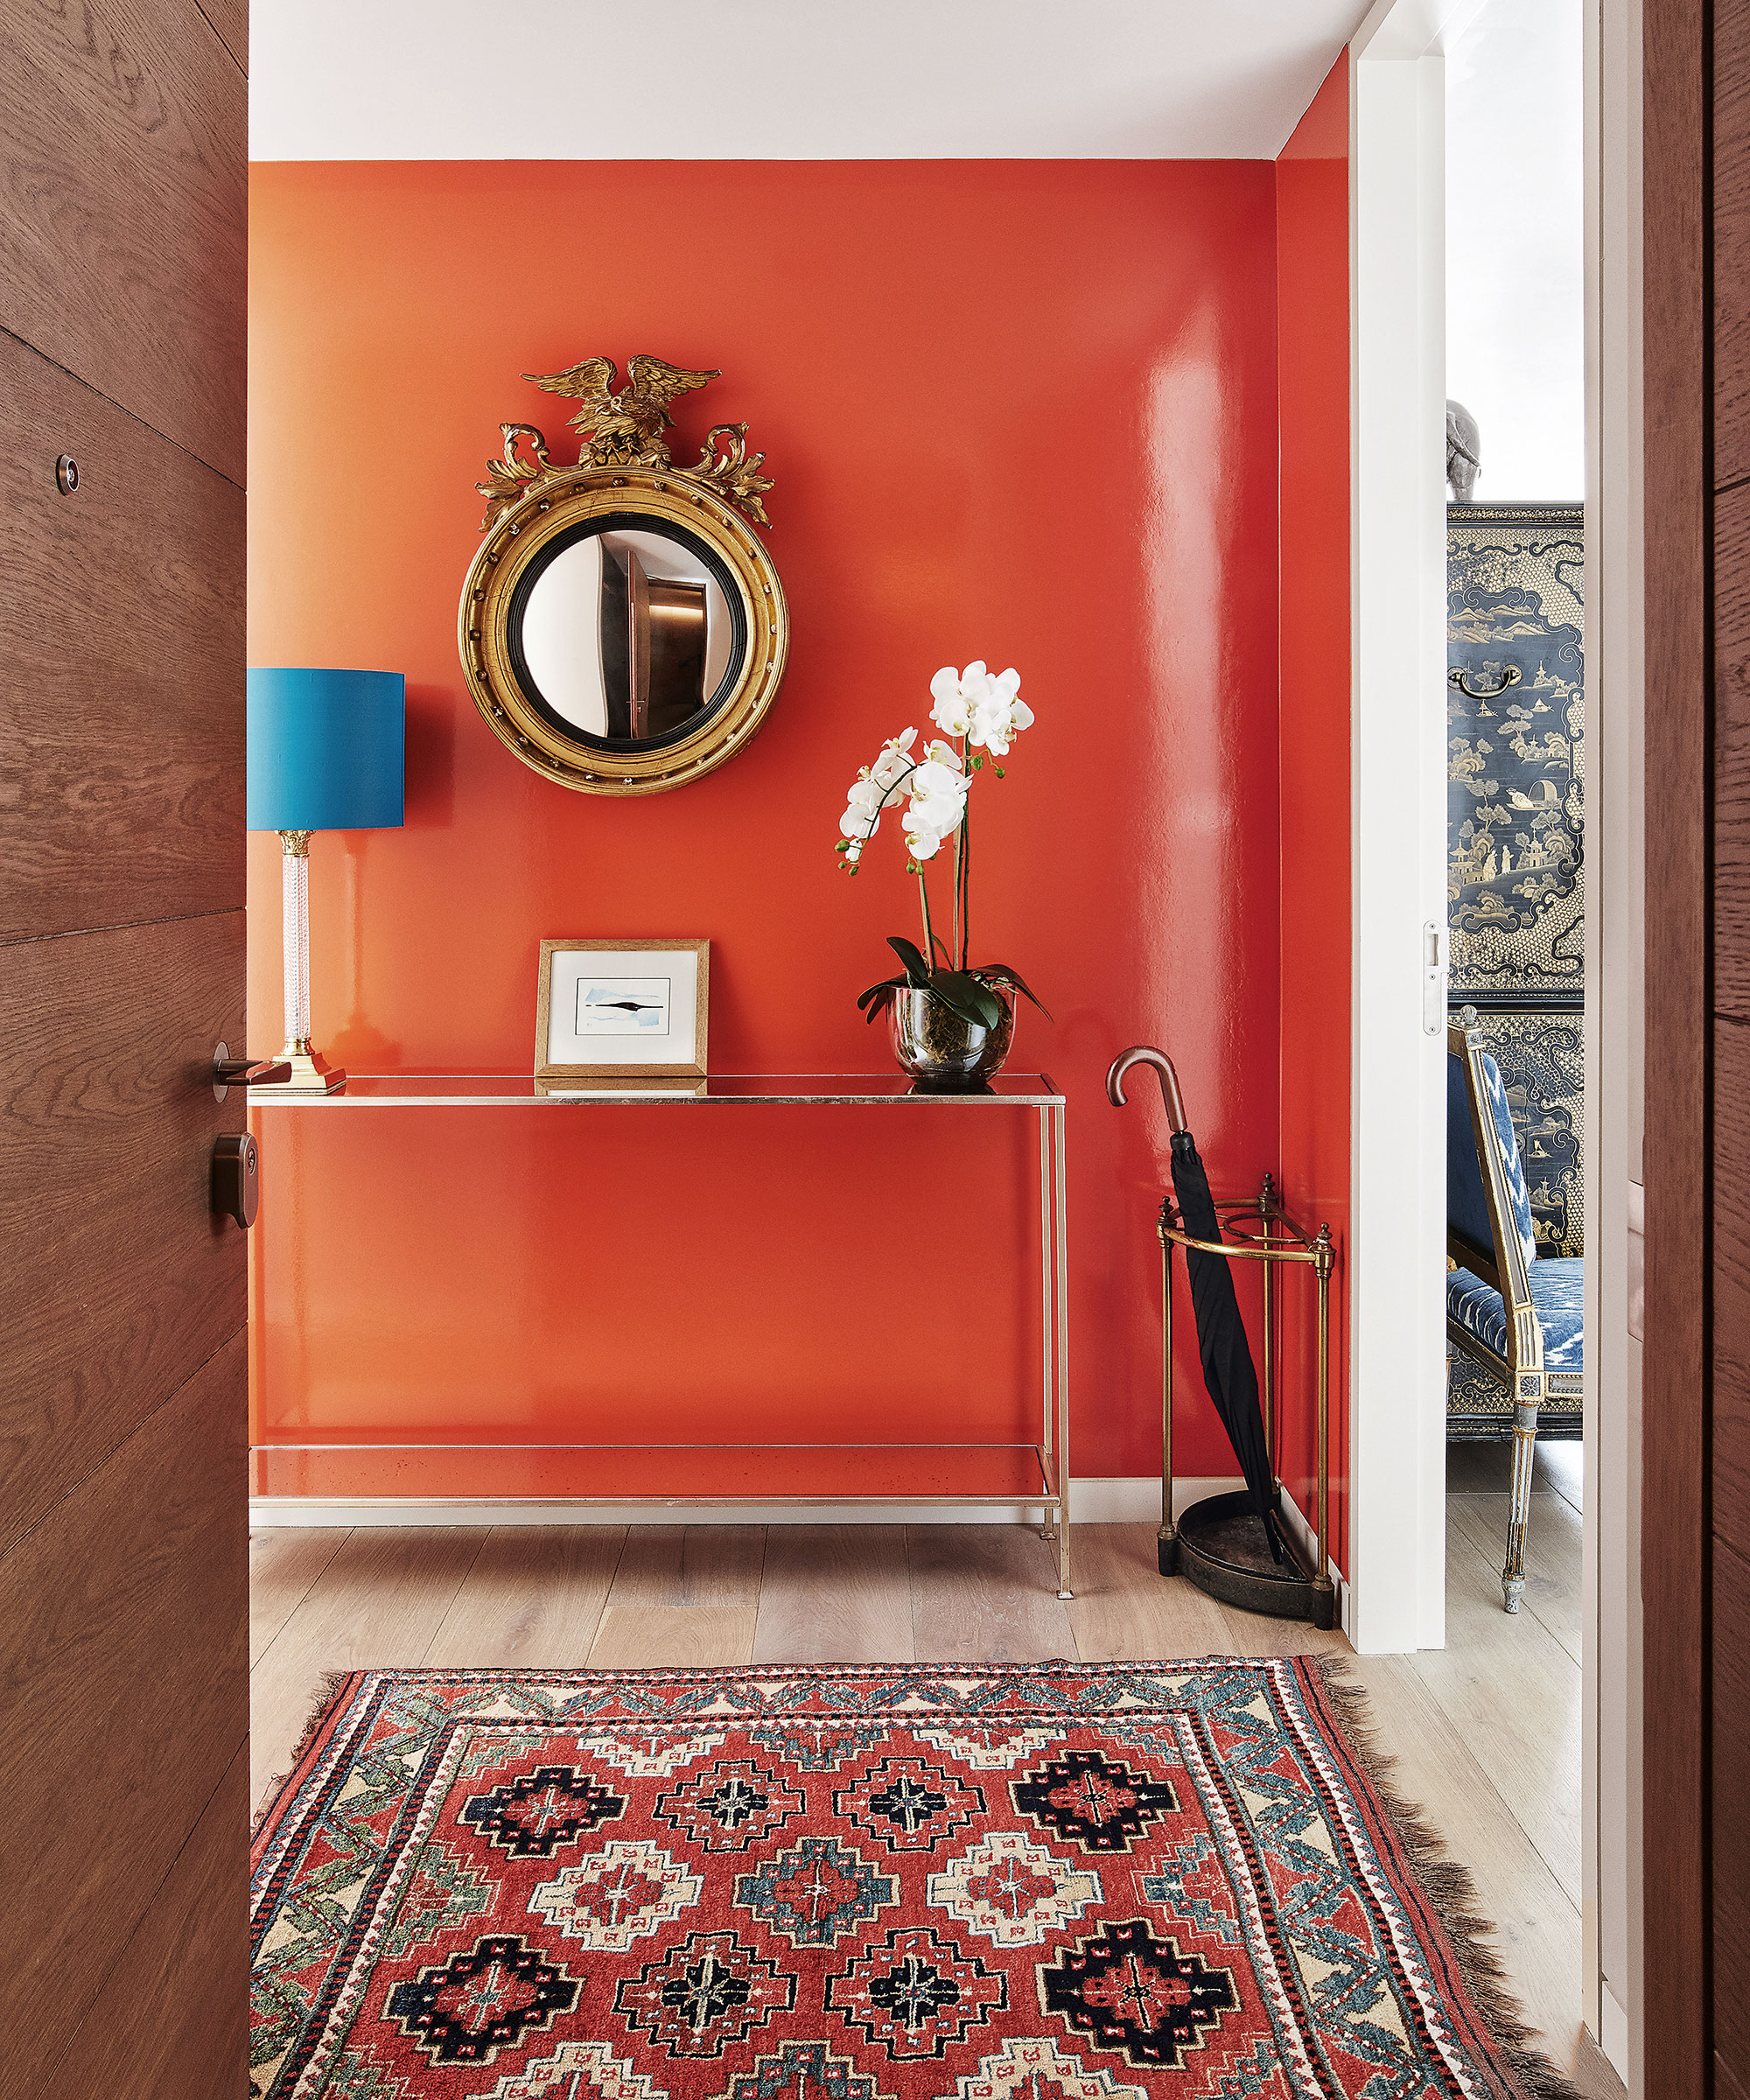 Hallway with orange and white color scheme and a patterned rug.